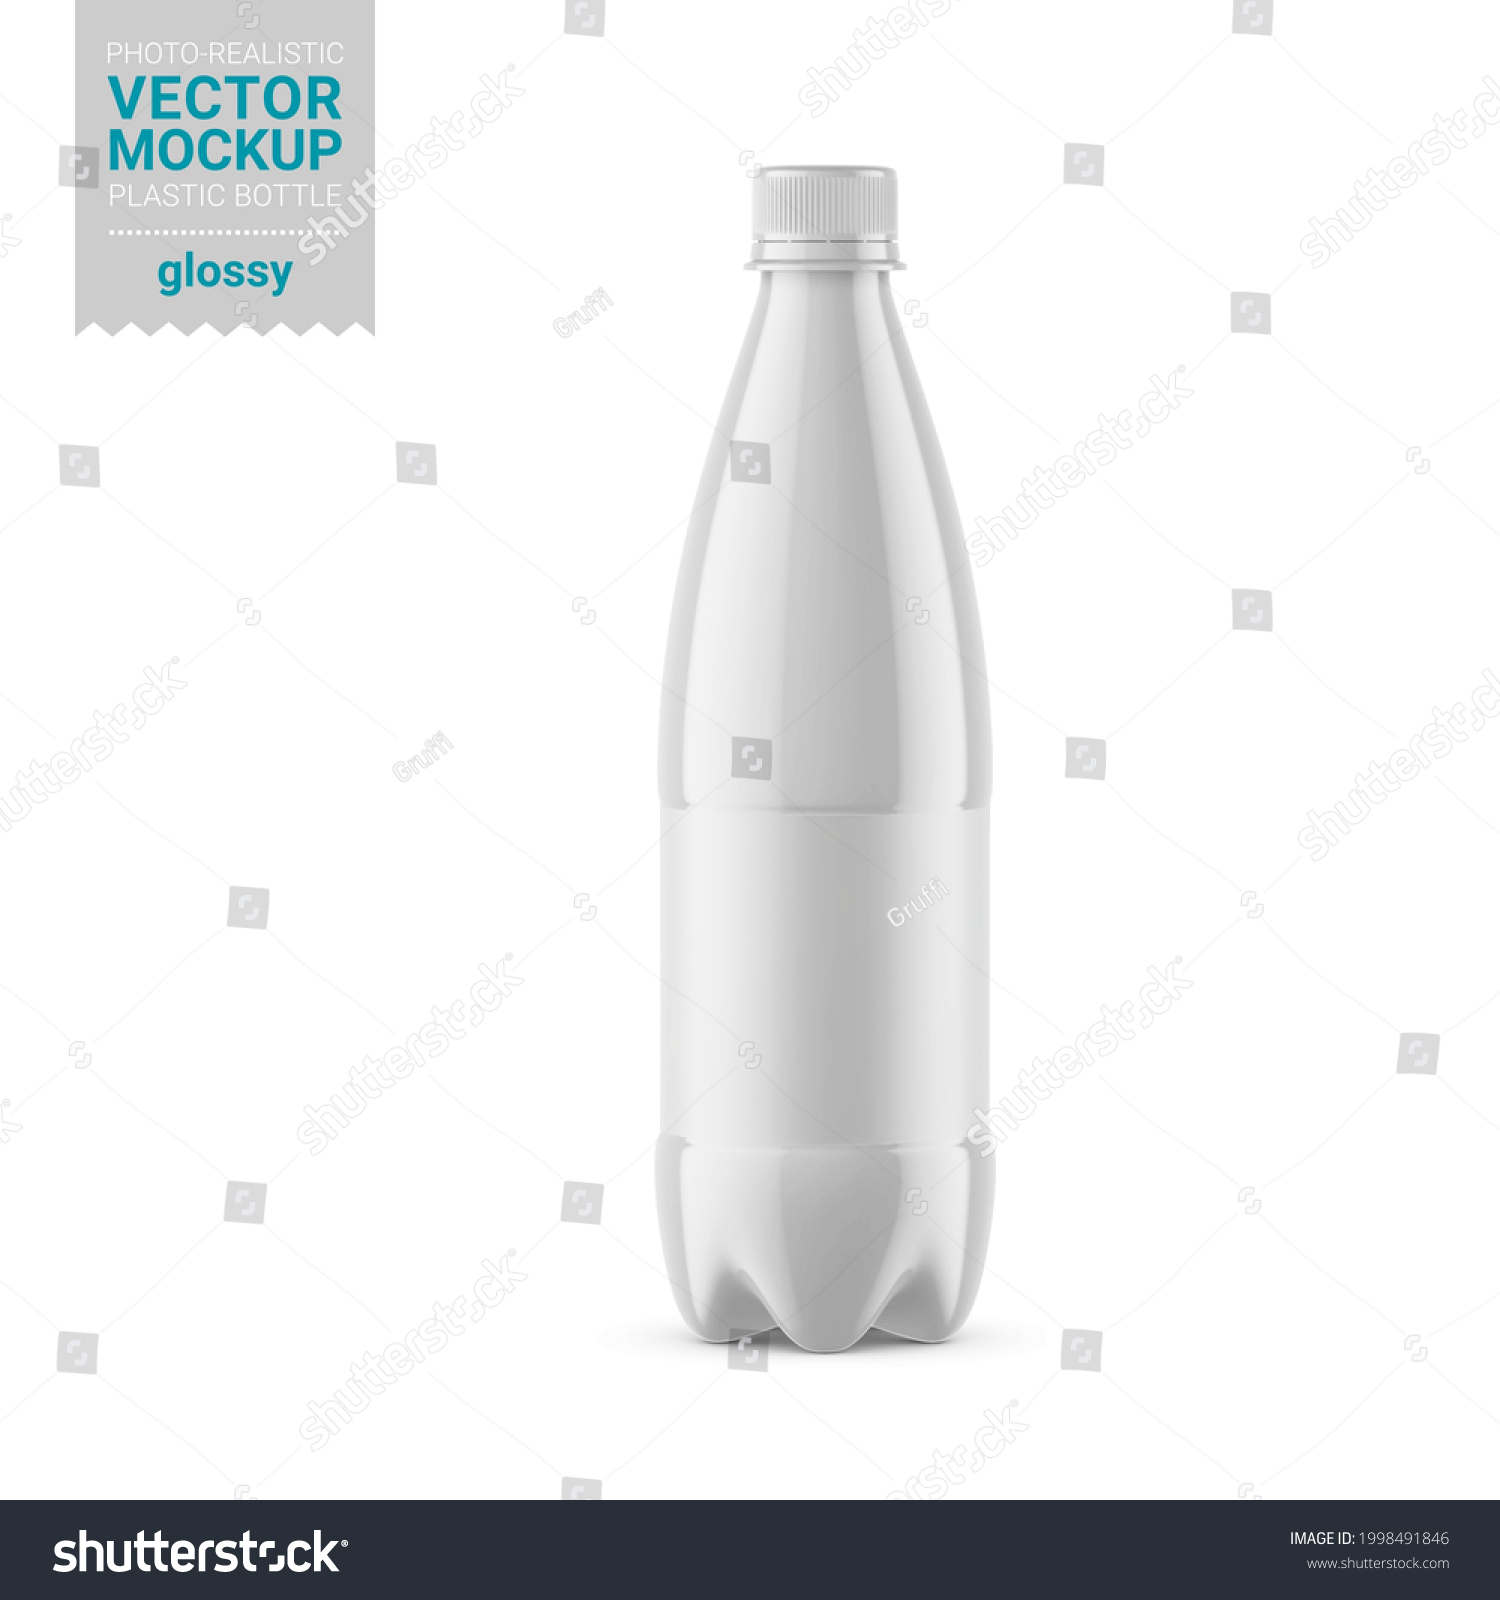 SVG of White glossy plastic bottle with screw cap. Photorealistic packaging mockup template. Vector 3d illustration. Contains an accurate mesh to wrap your artwork with the correct envelope distortion. svg